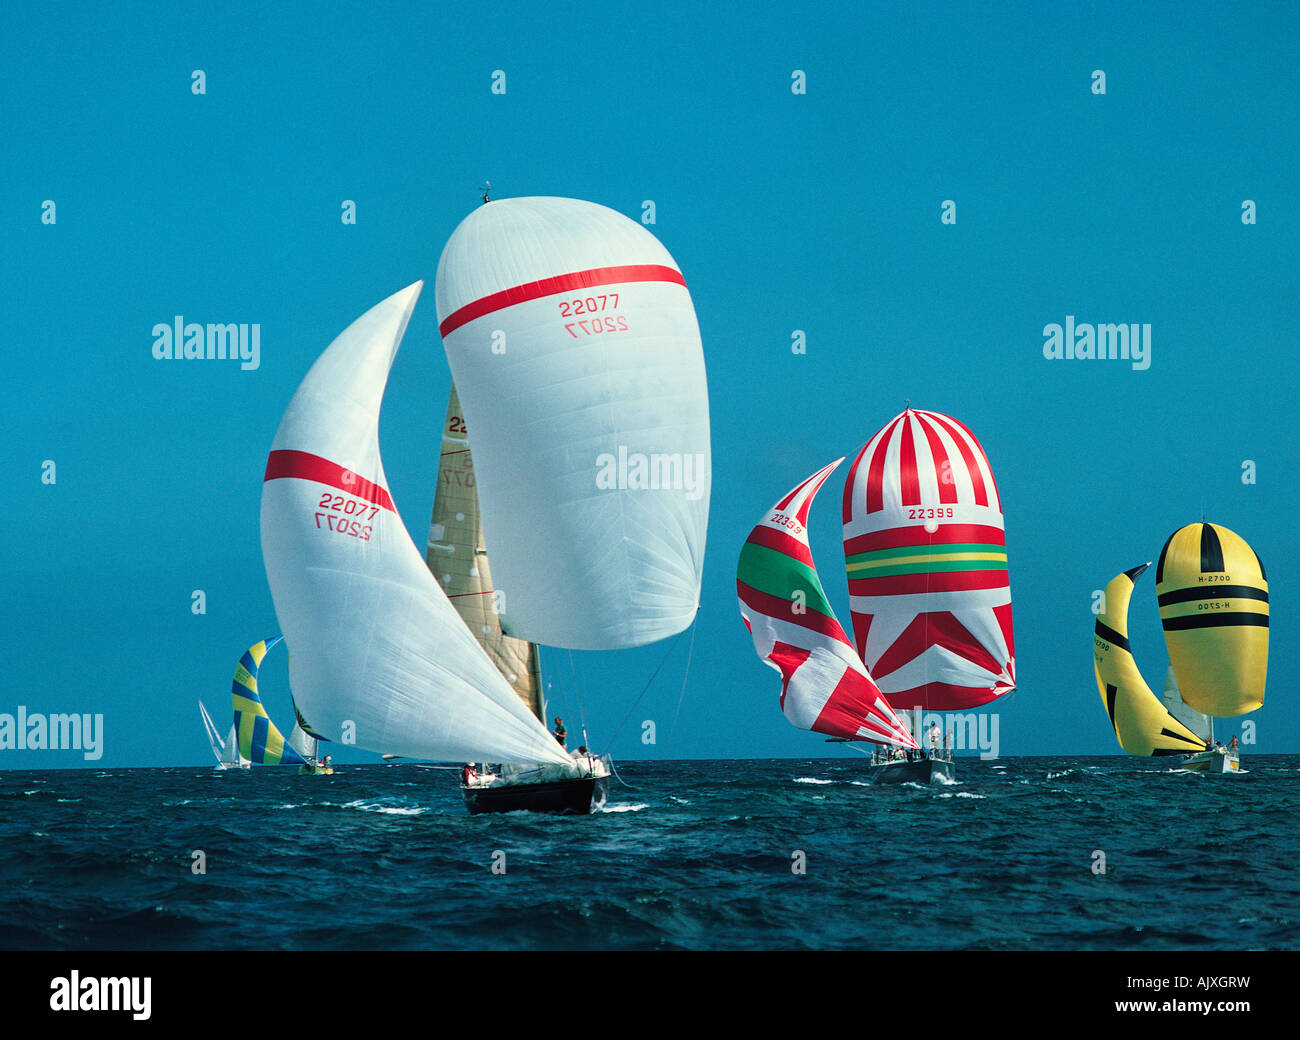 Yacht race. Boats with spinnaker sails. UK. Cowes. Isle of Wight. Stock Photo